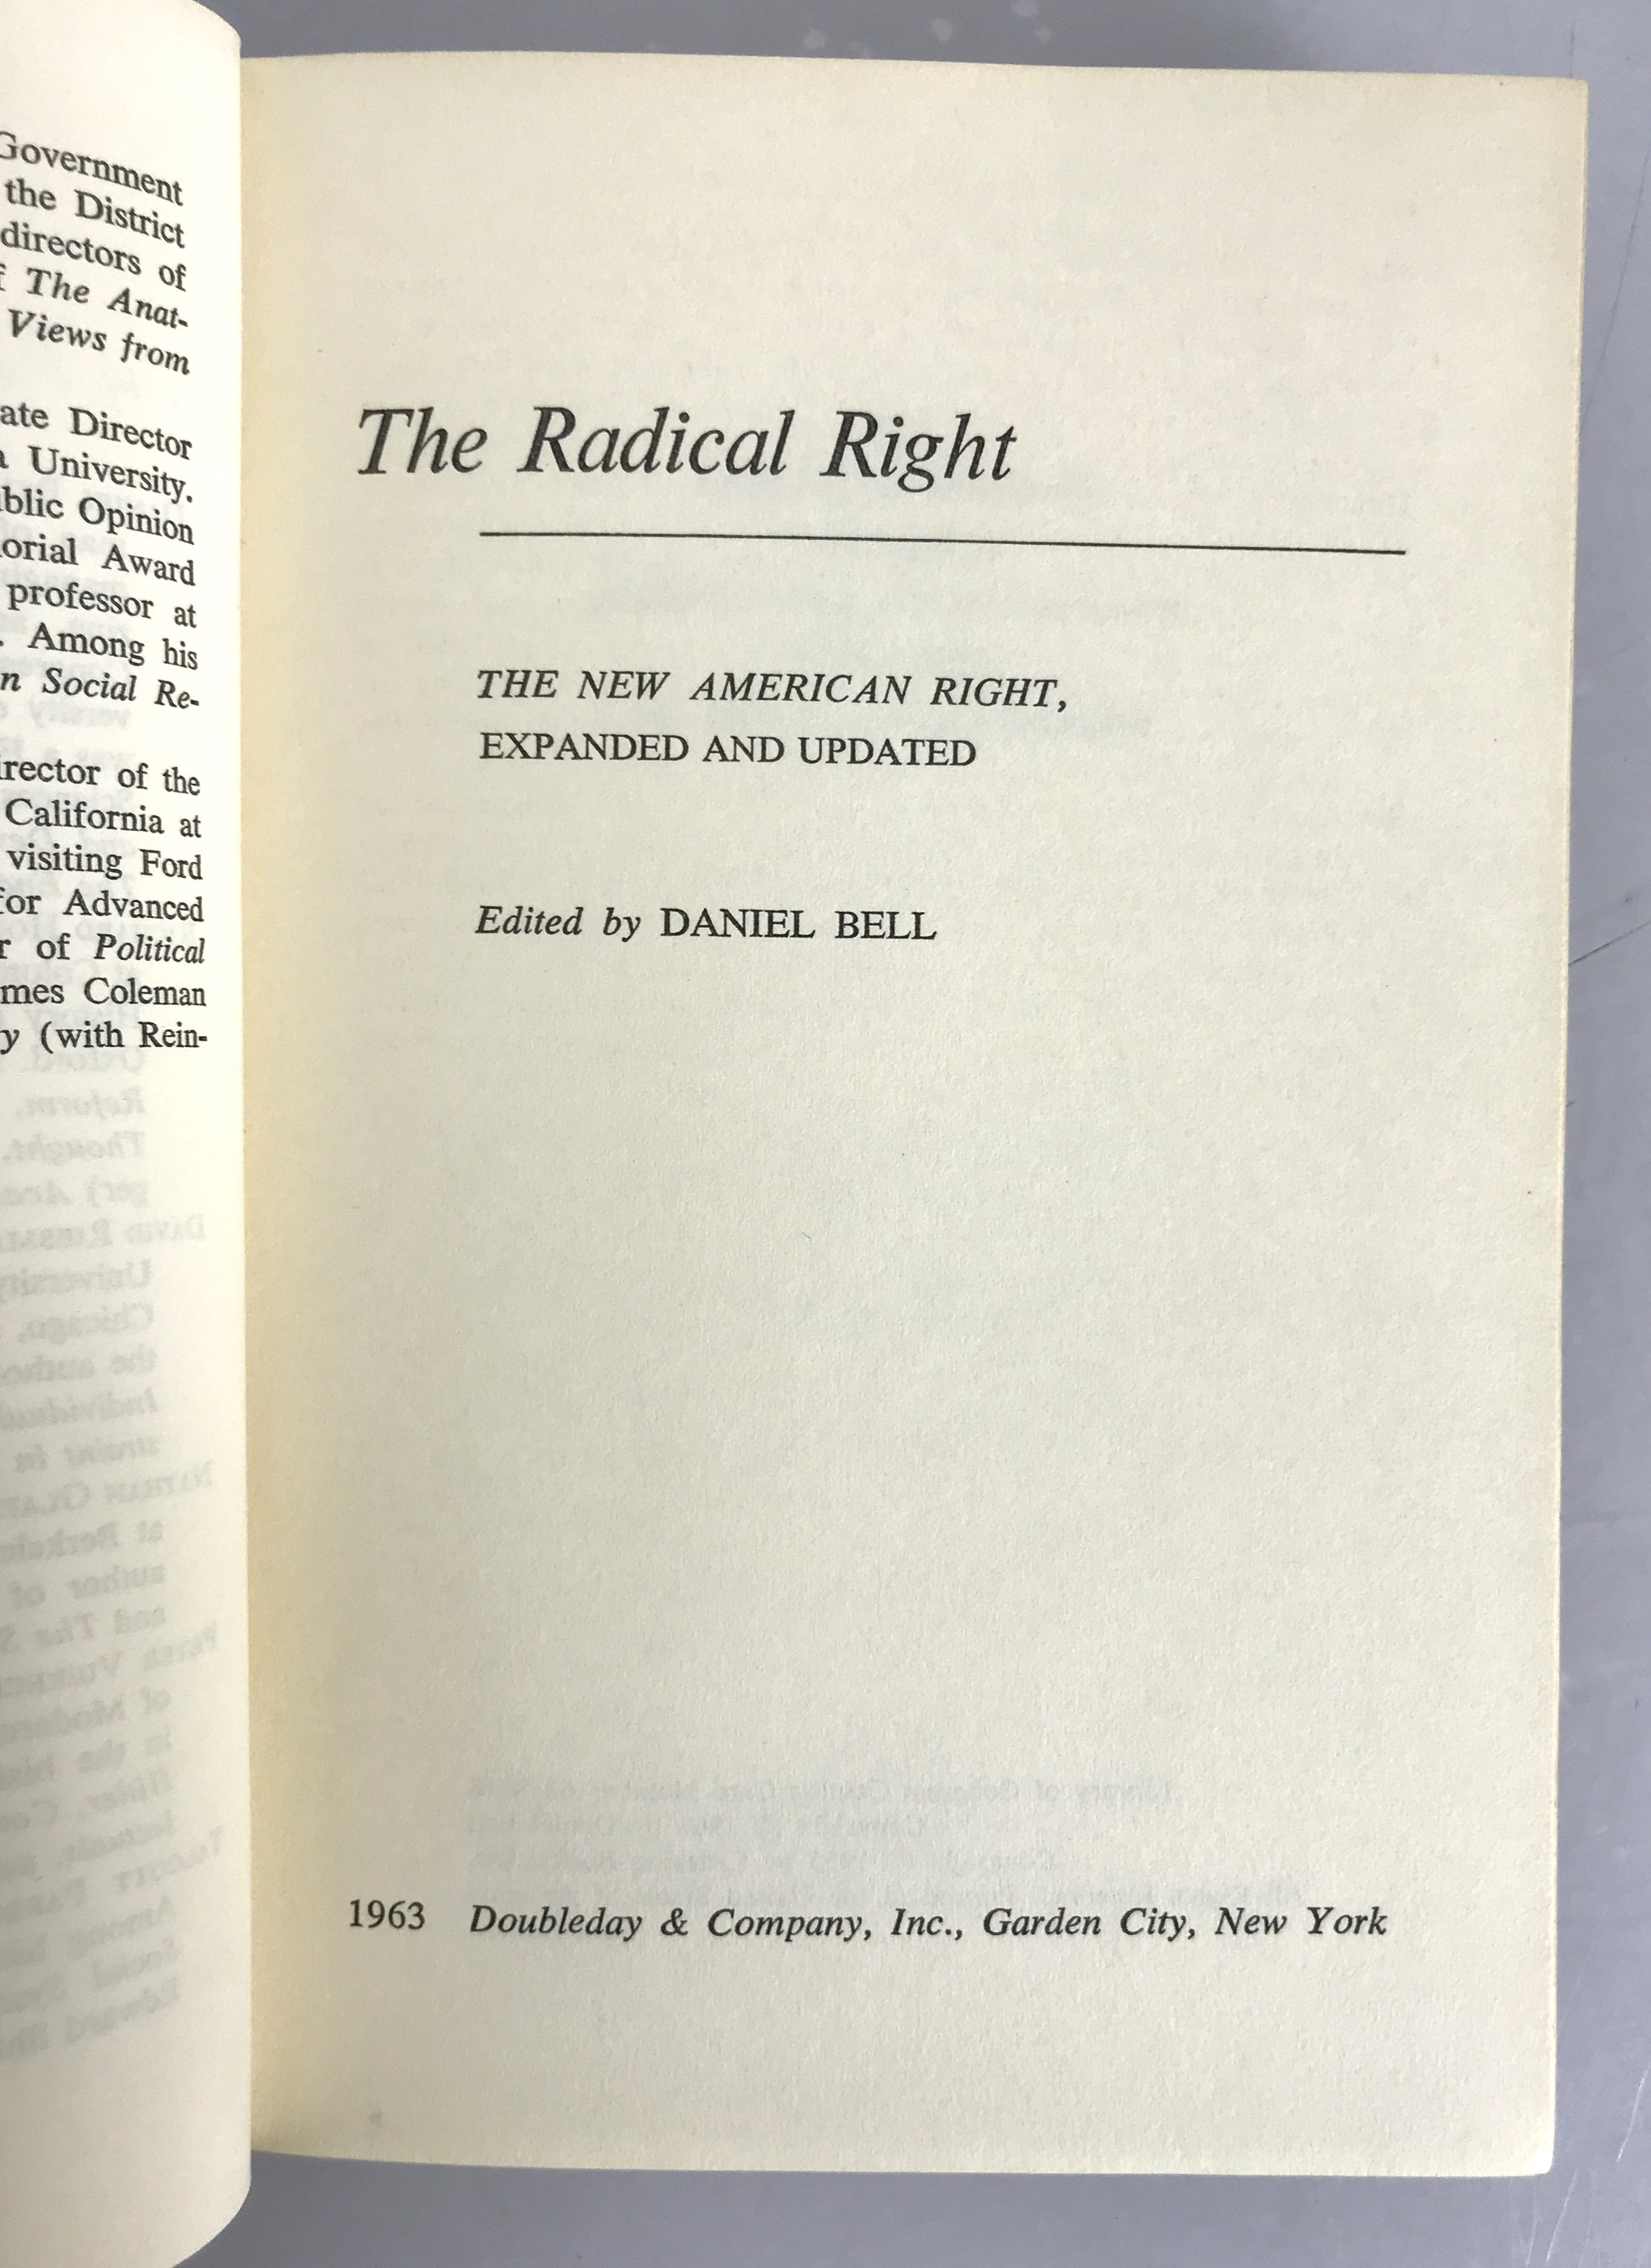 The Radical Right by Daniel Bell First Doubleday Edition 1963 HC